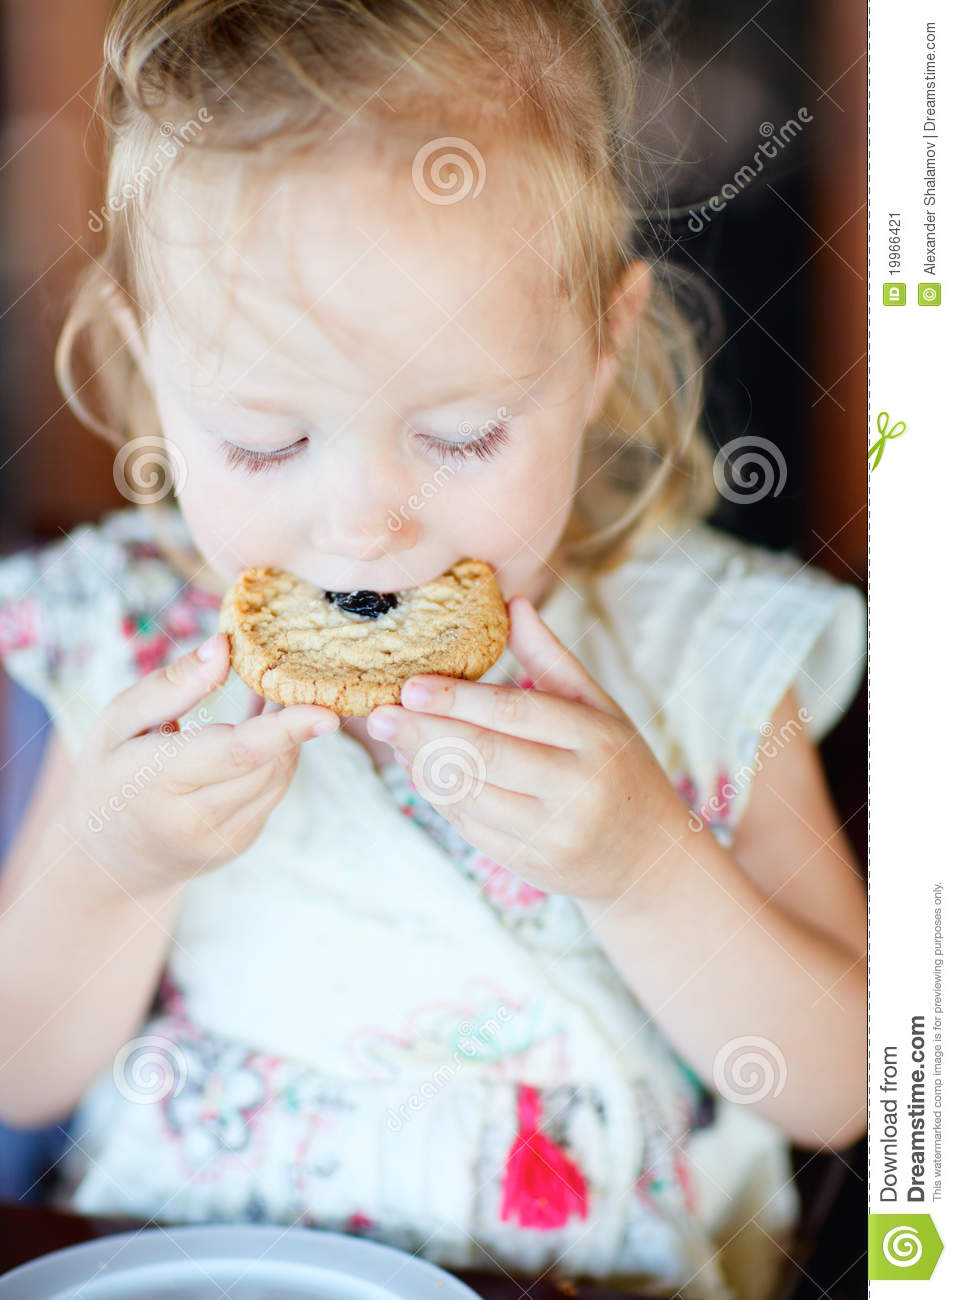 Girl Eating Cookie Stock Image   Image  19966421